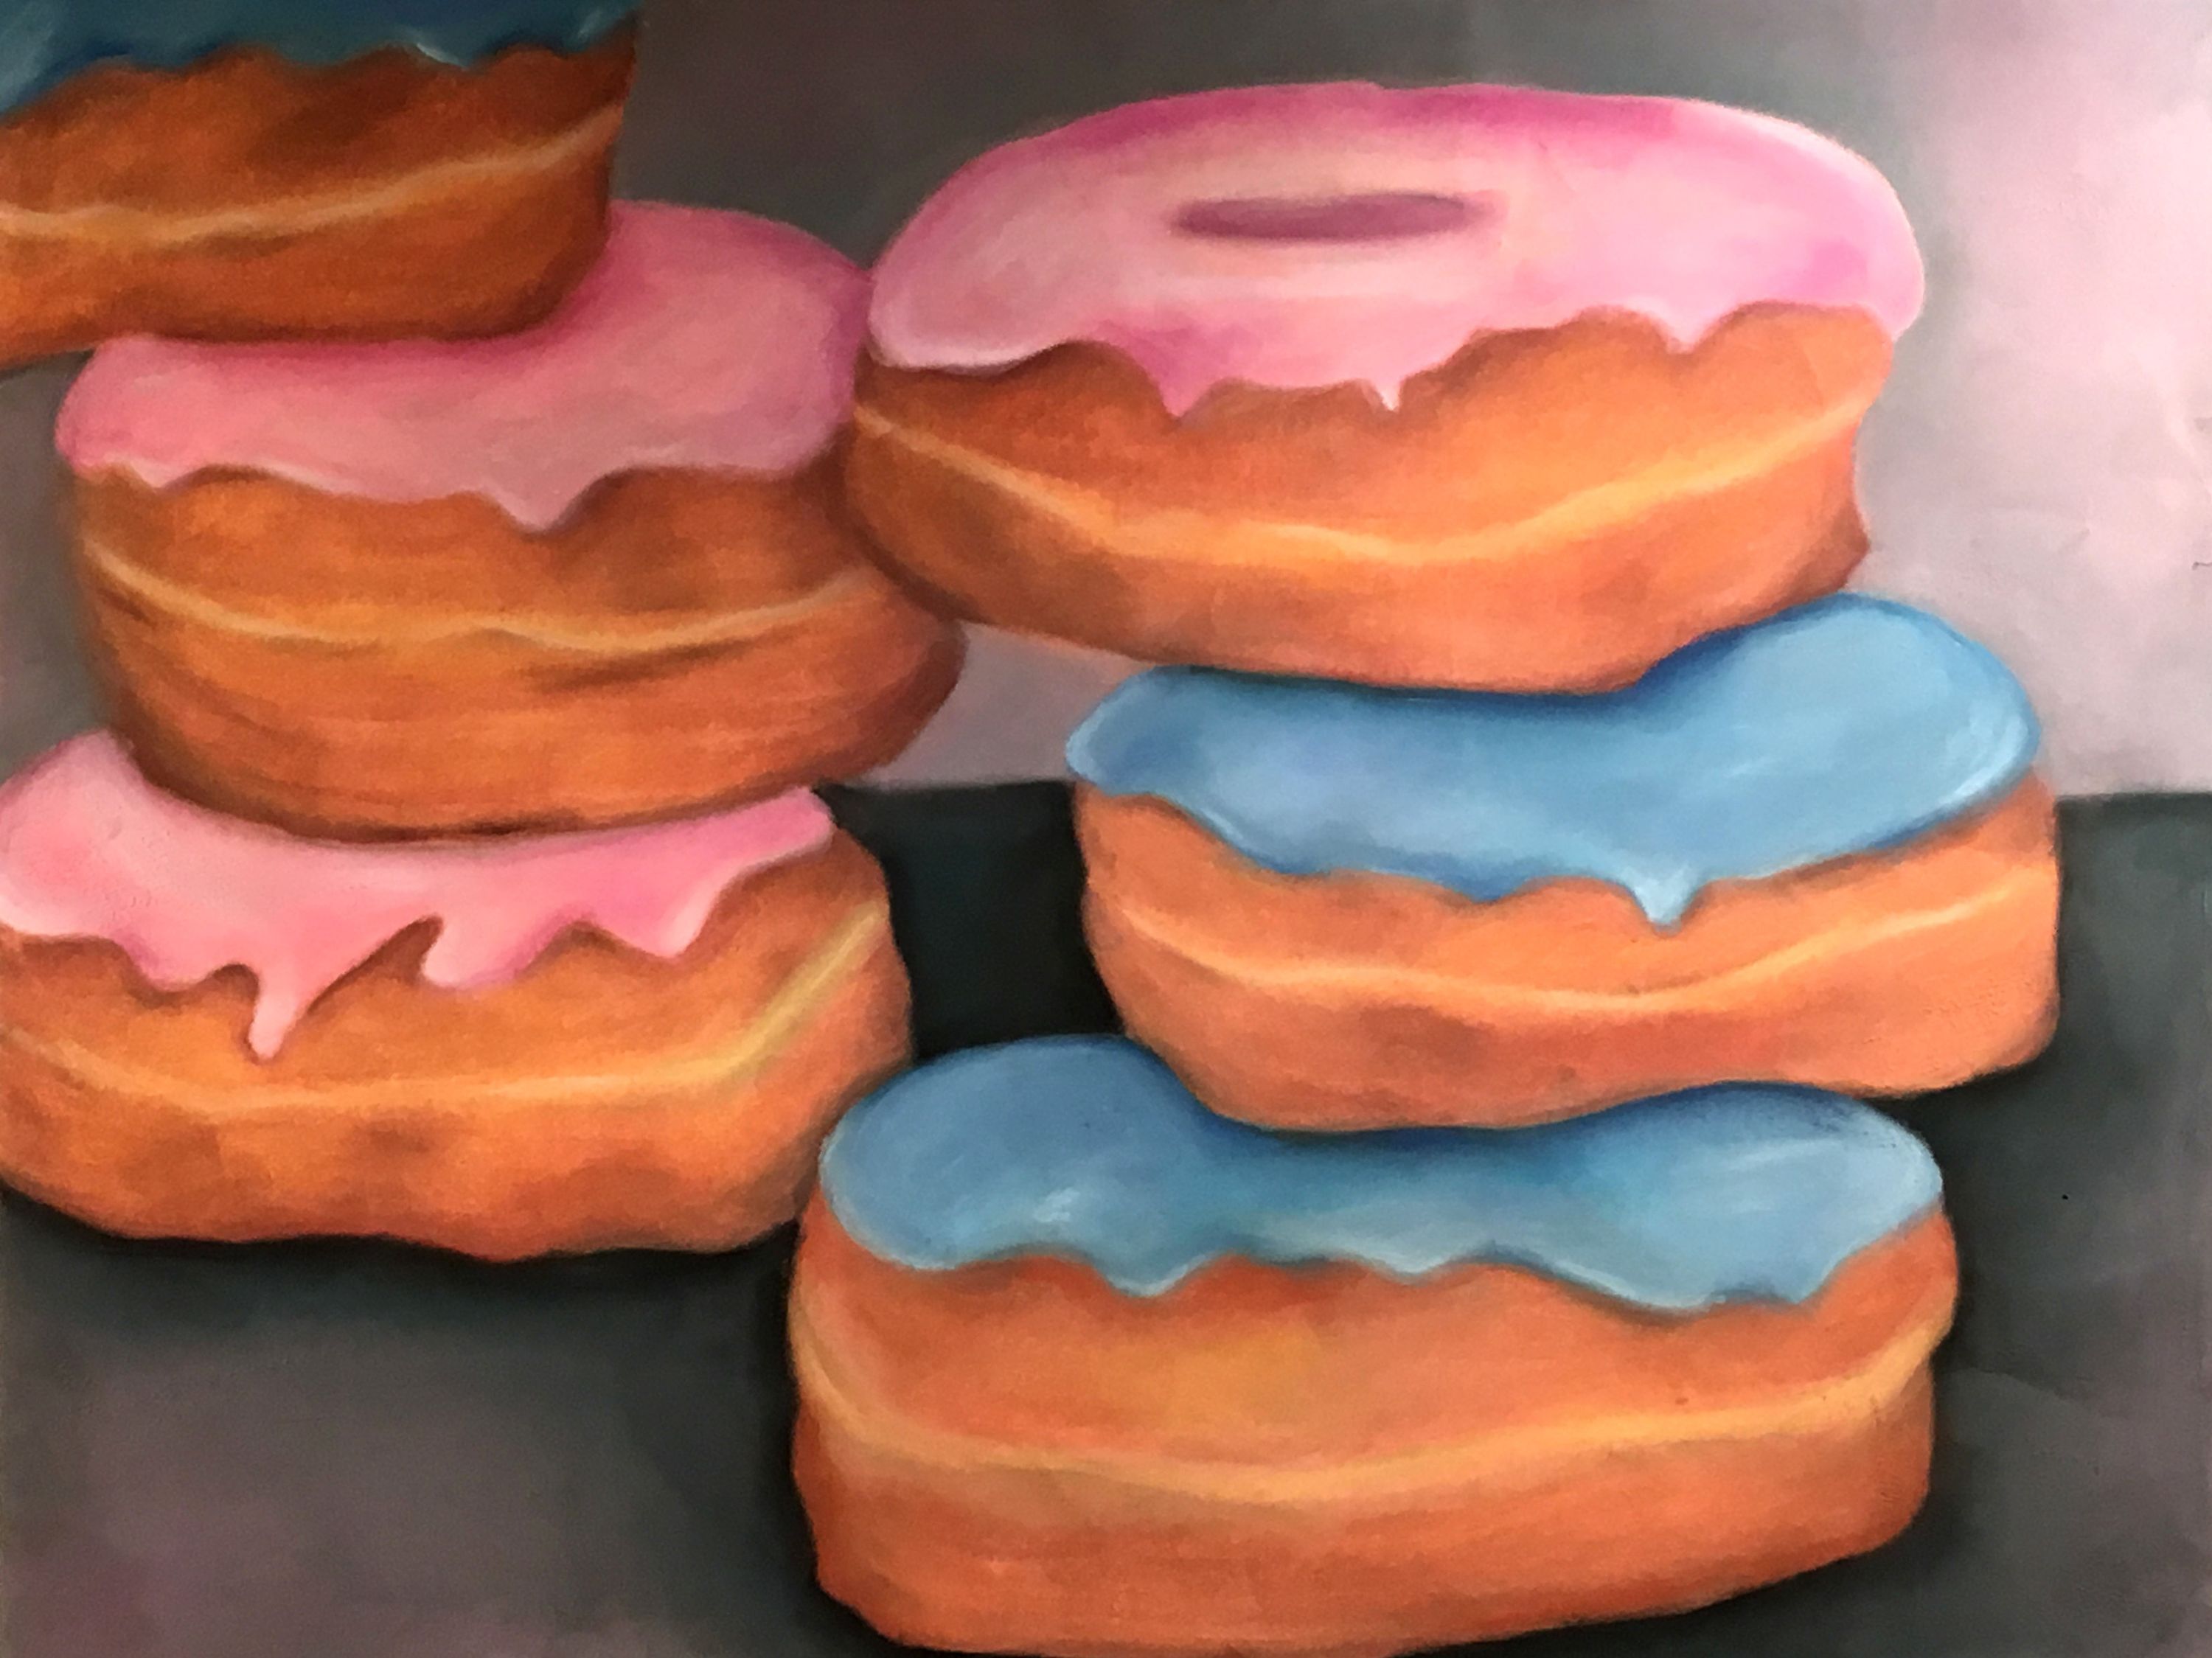 This art piece is named ‘Donuts' 